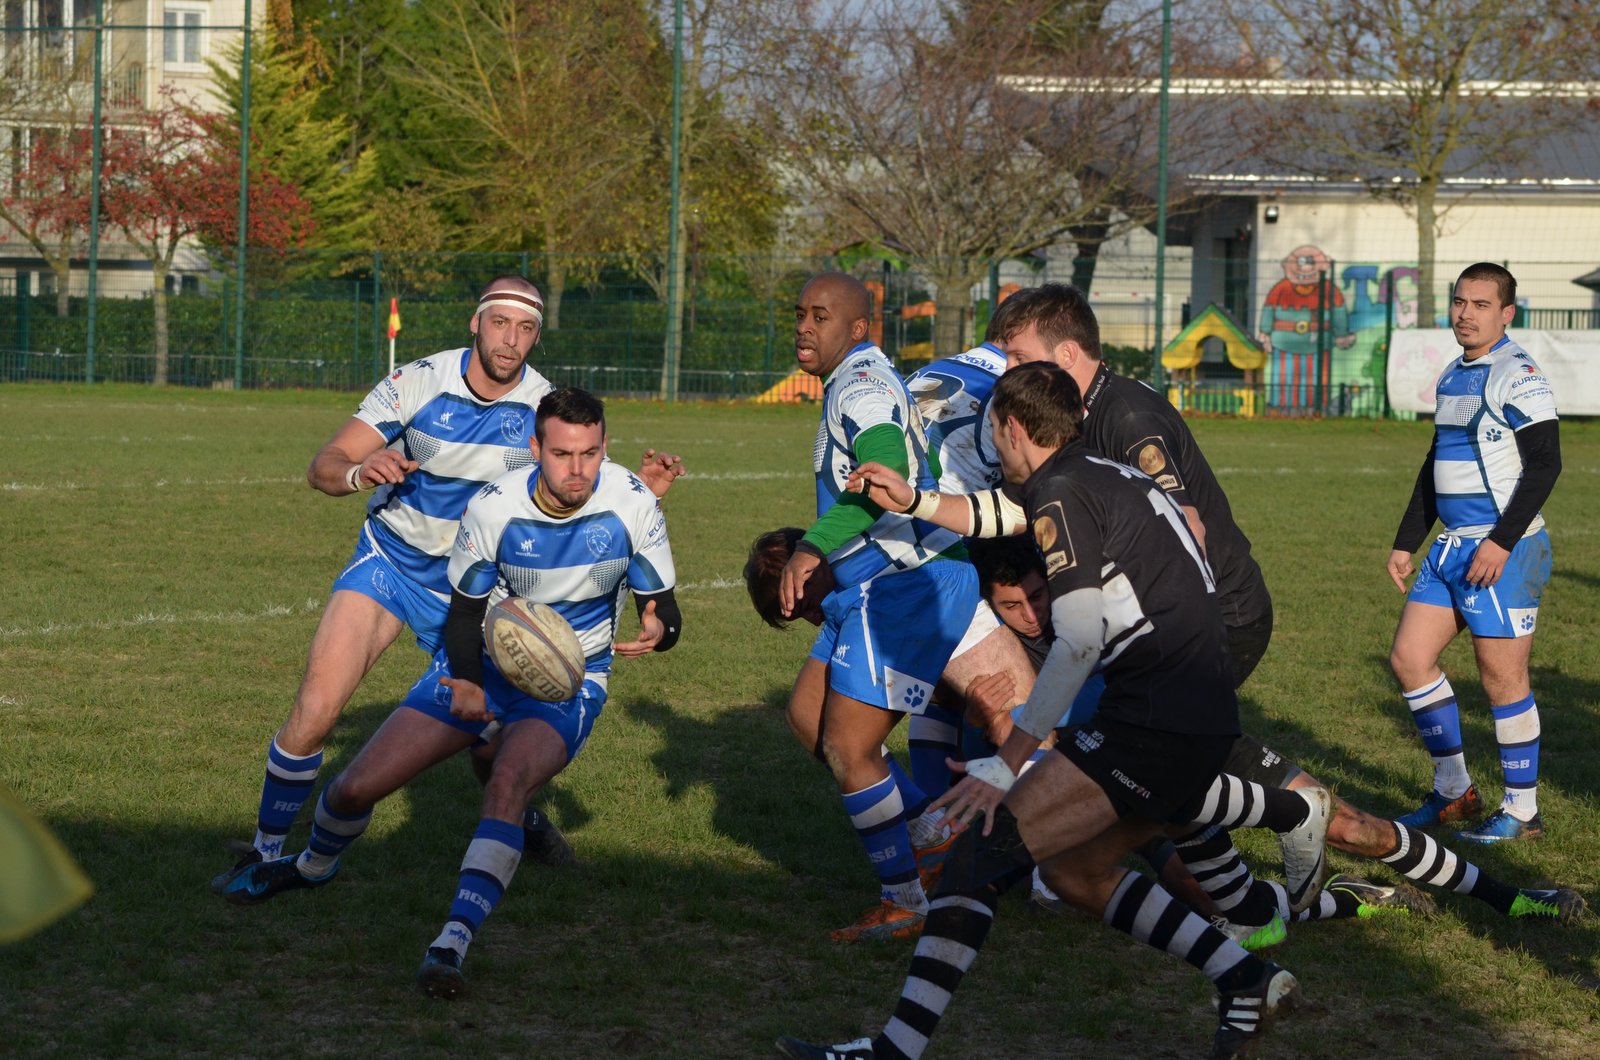 two teams compete in an international rugby game